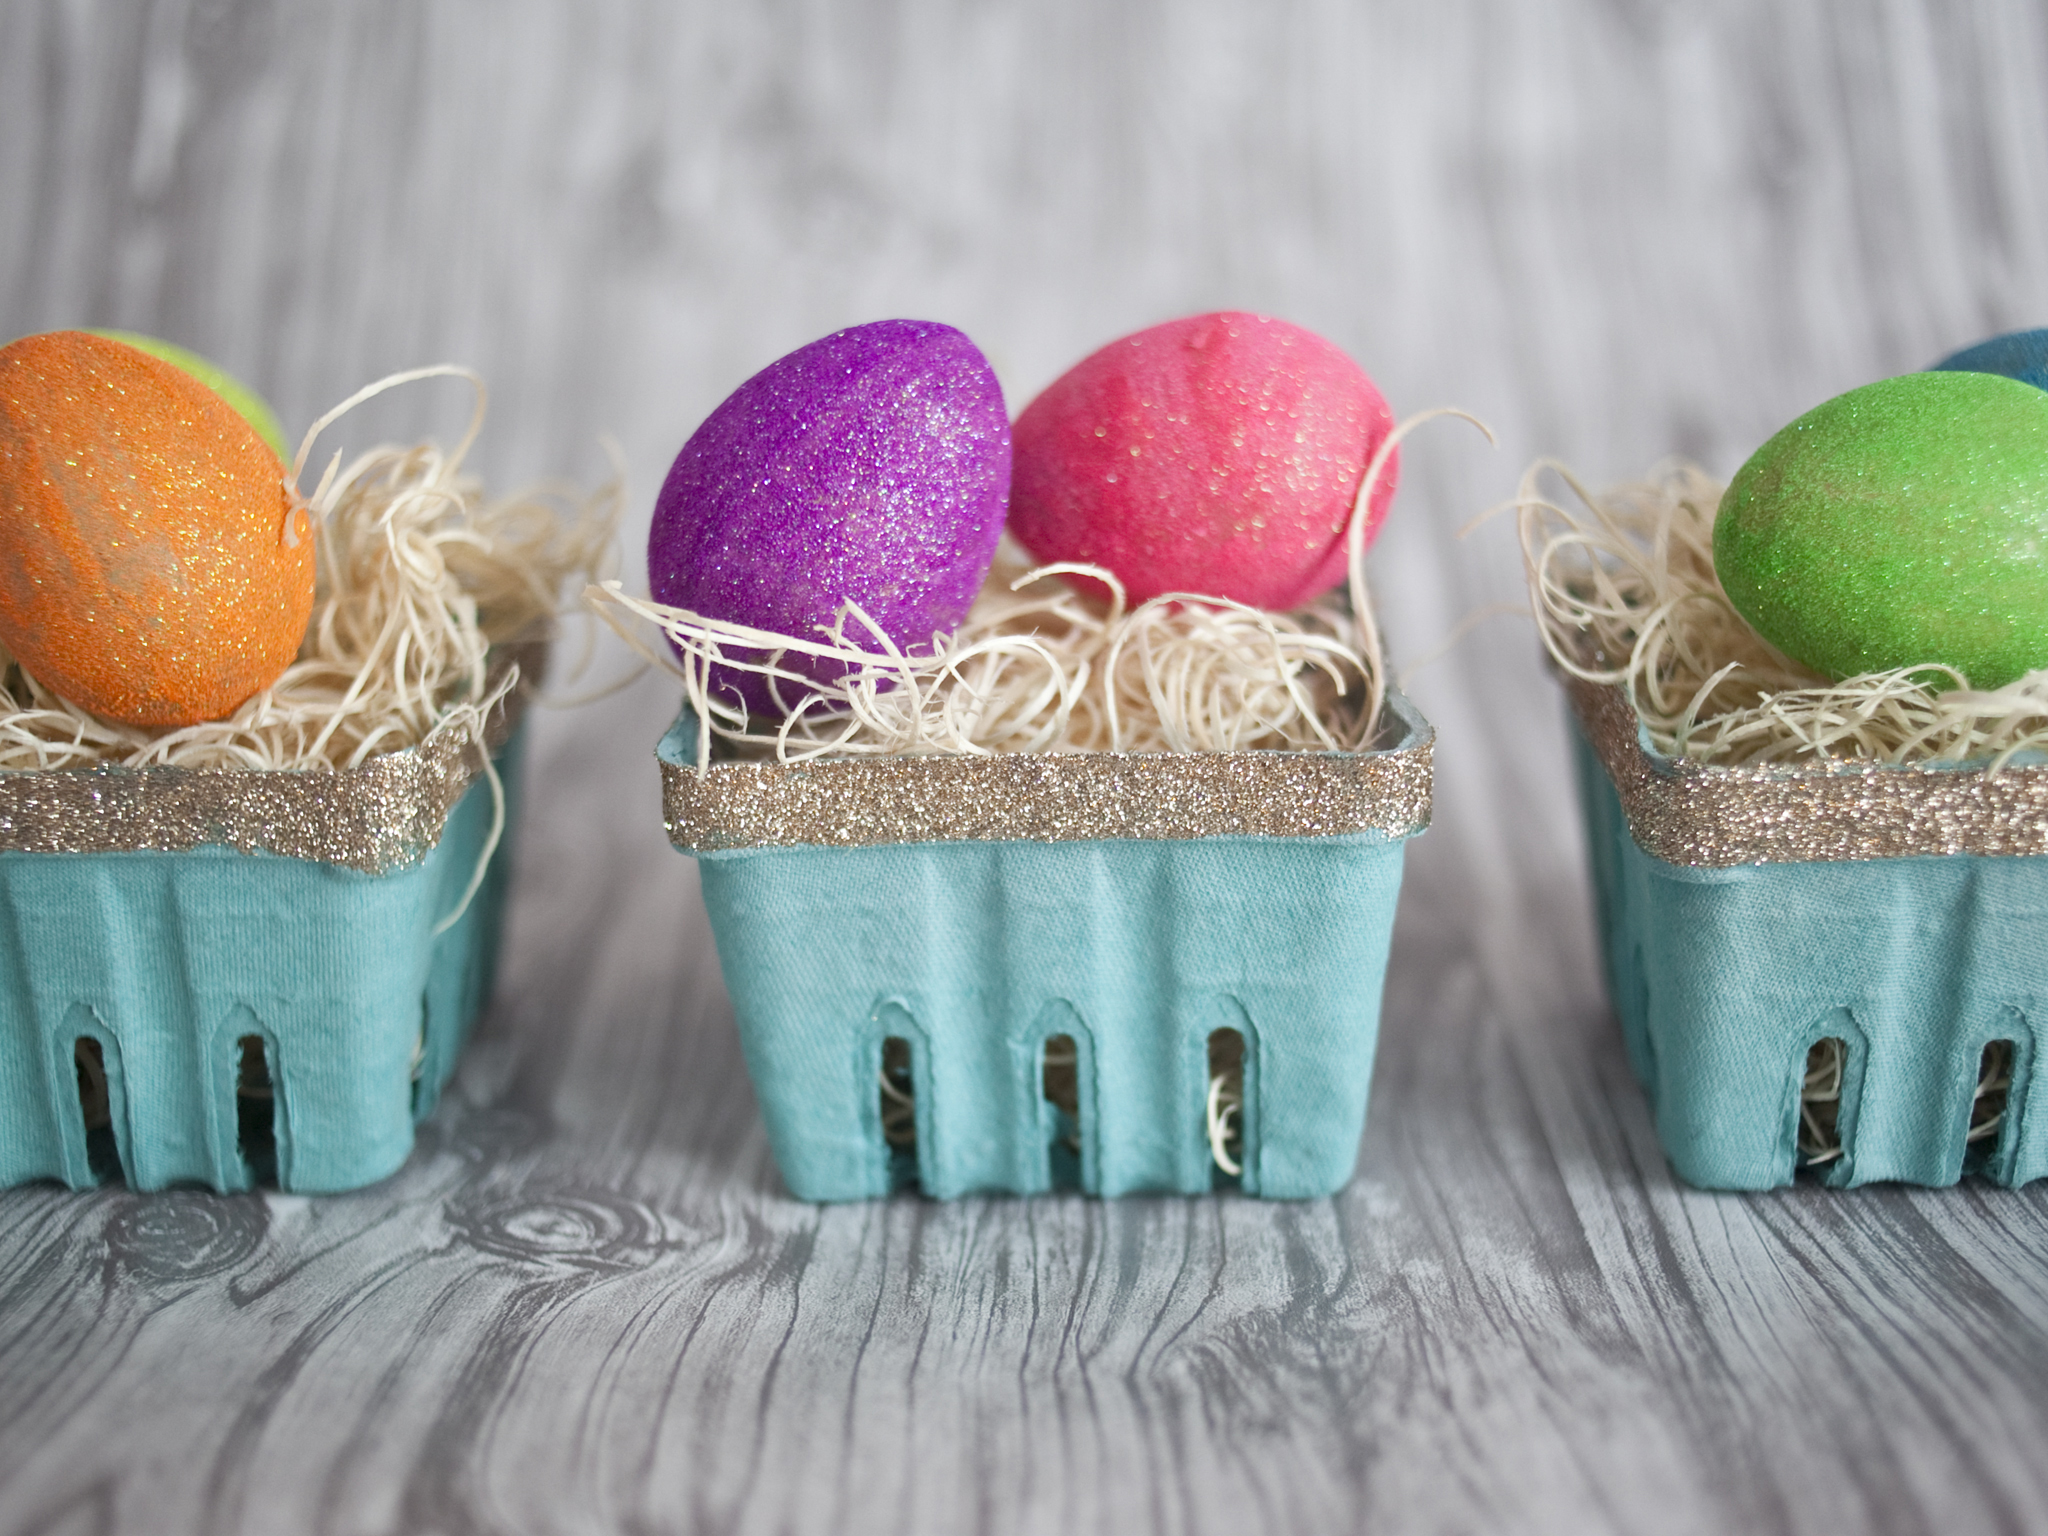 Details about   Easter Eggs*Basket Fillers*Table scatter*Decorations or Ornaments NEW 8-14 Eggs 